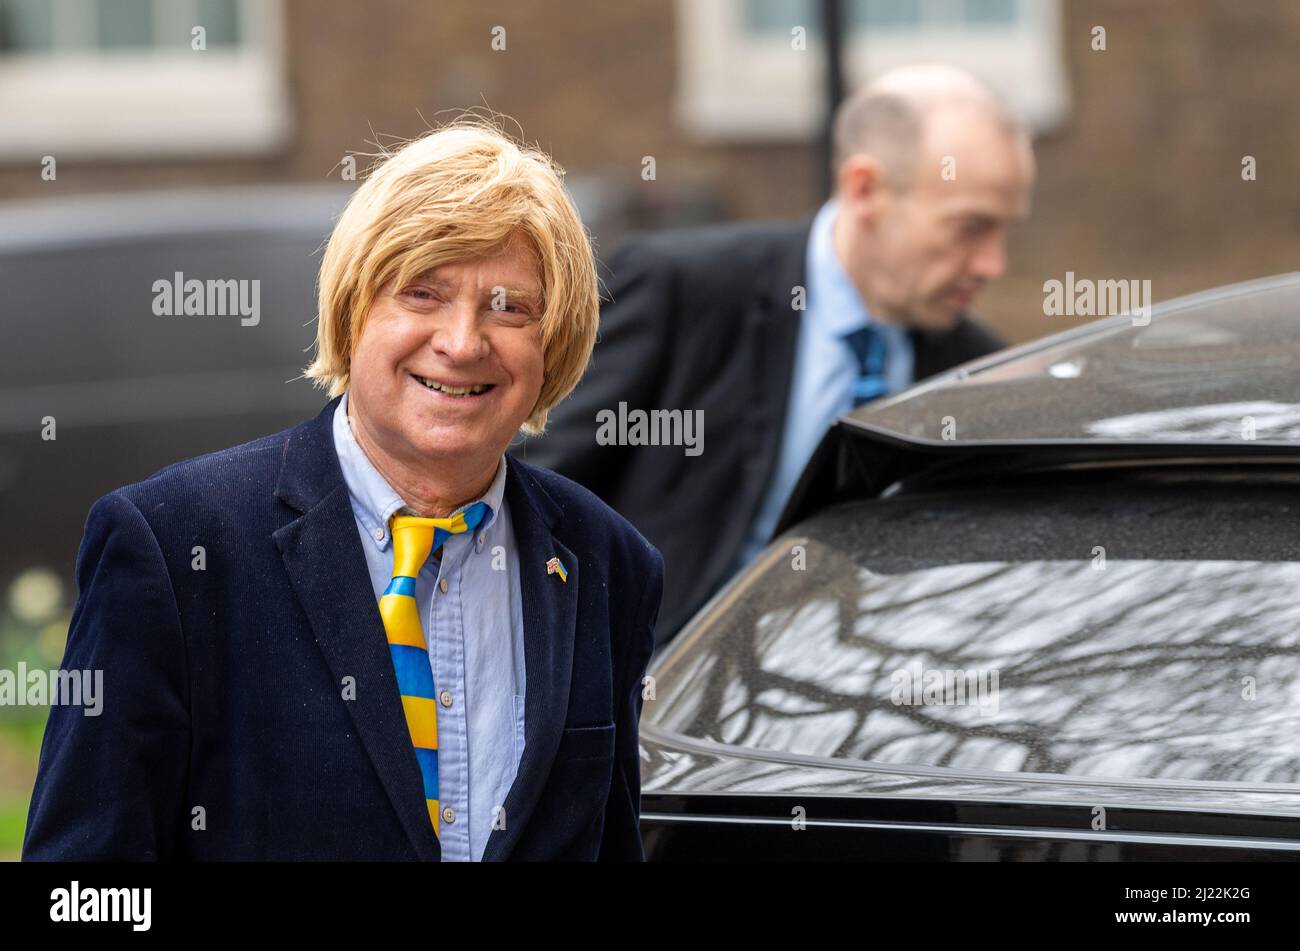 London, UK. 29th Mar, 2022. Senior Conservative MP's in Downing Street, London Pictured Michael Fabricant MP for Litchfield Credit: Ian Davidson/Alamy Live News Stock Photo